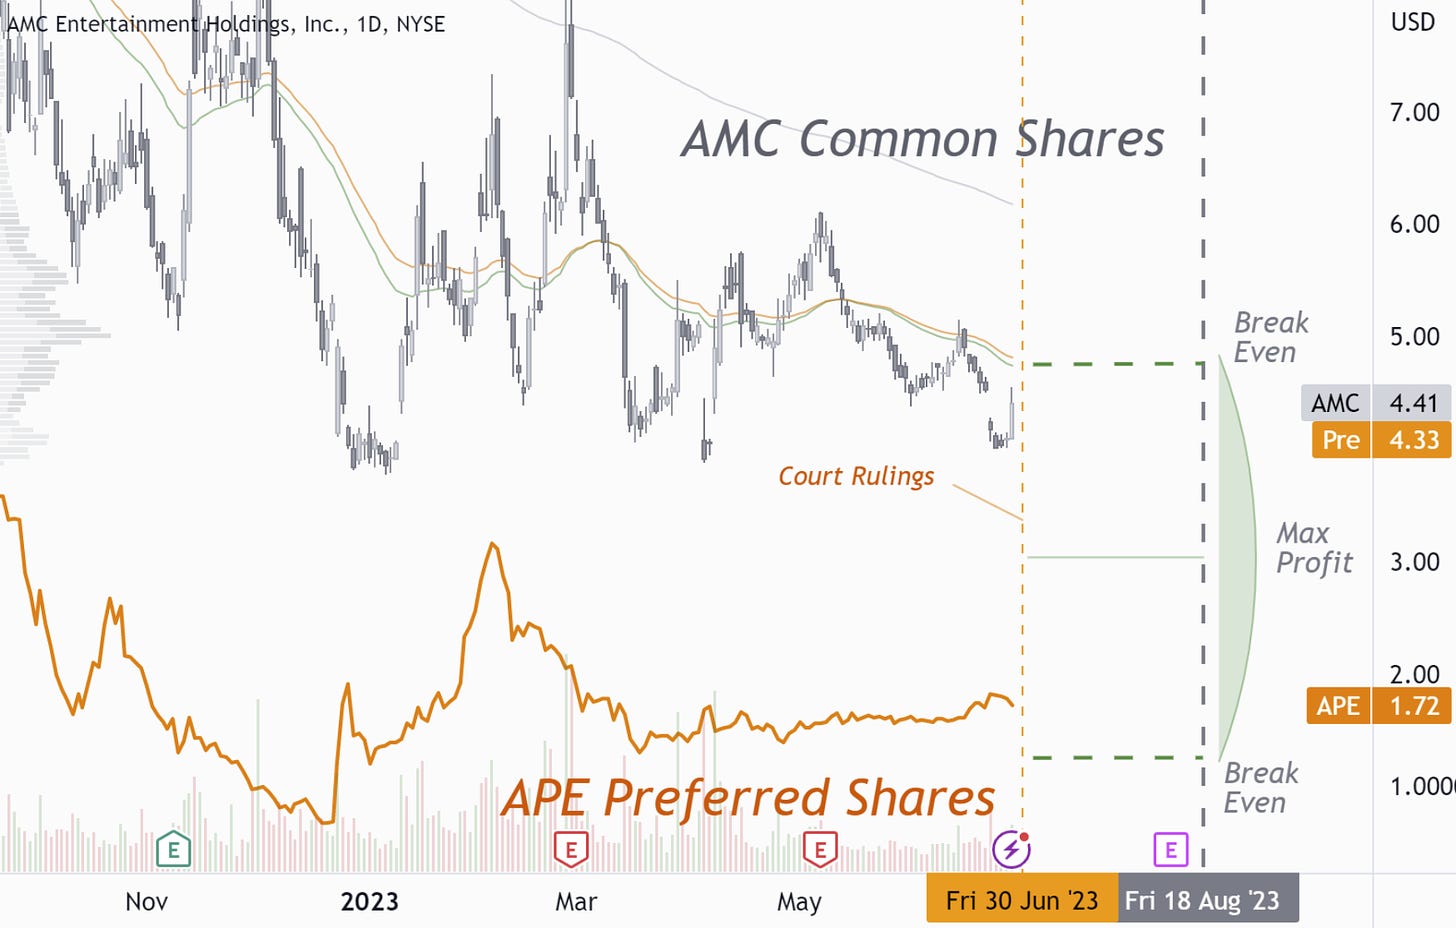 AMC: Converging with APE or Filing for Bankruptcy?